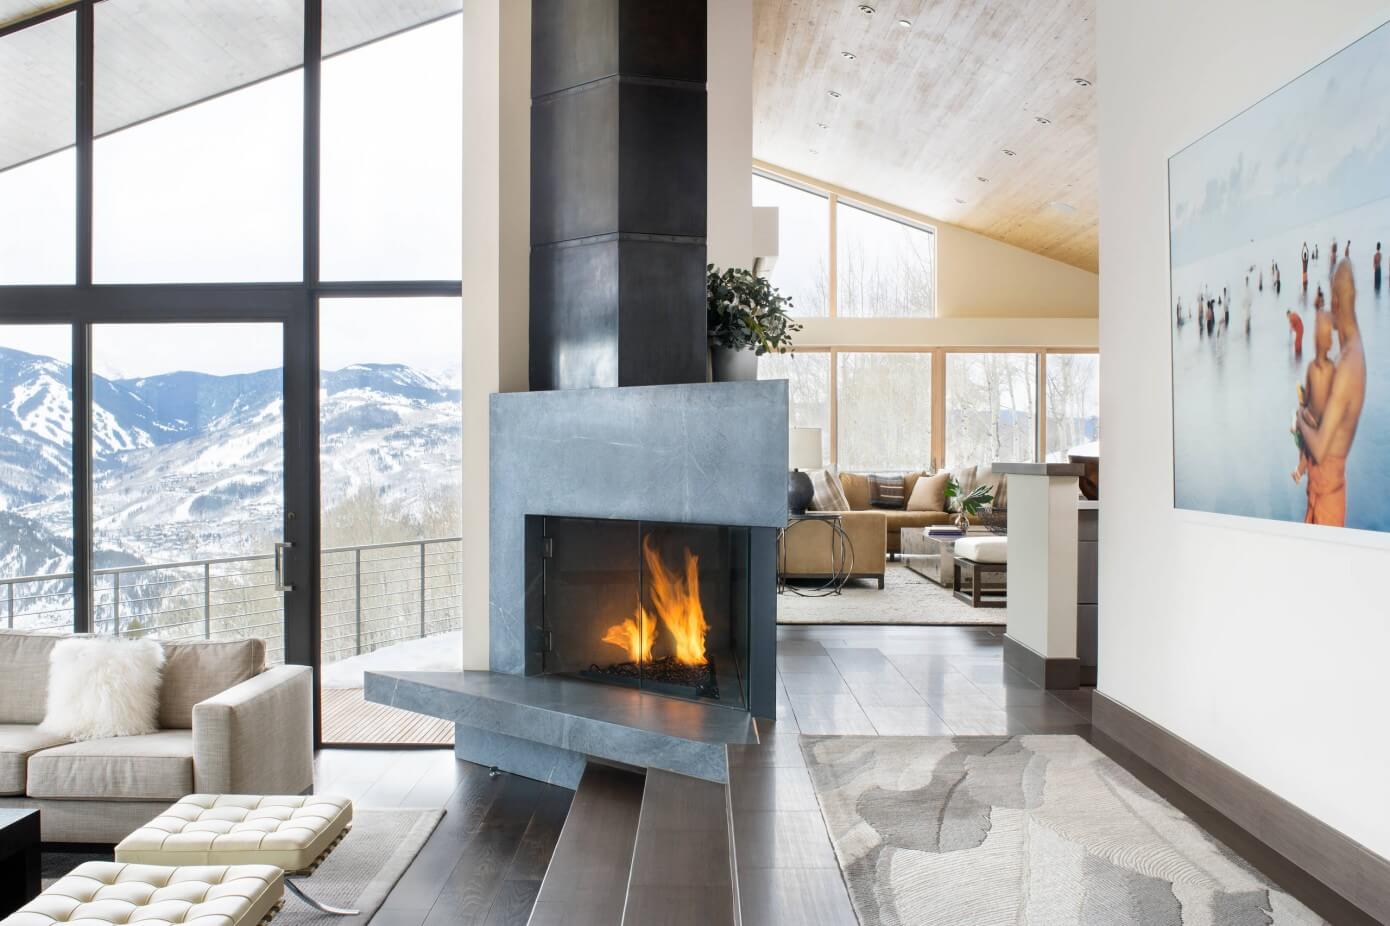 Mountain Star by K. H. Webb Architects